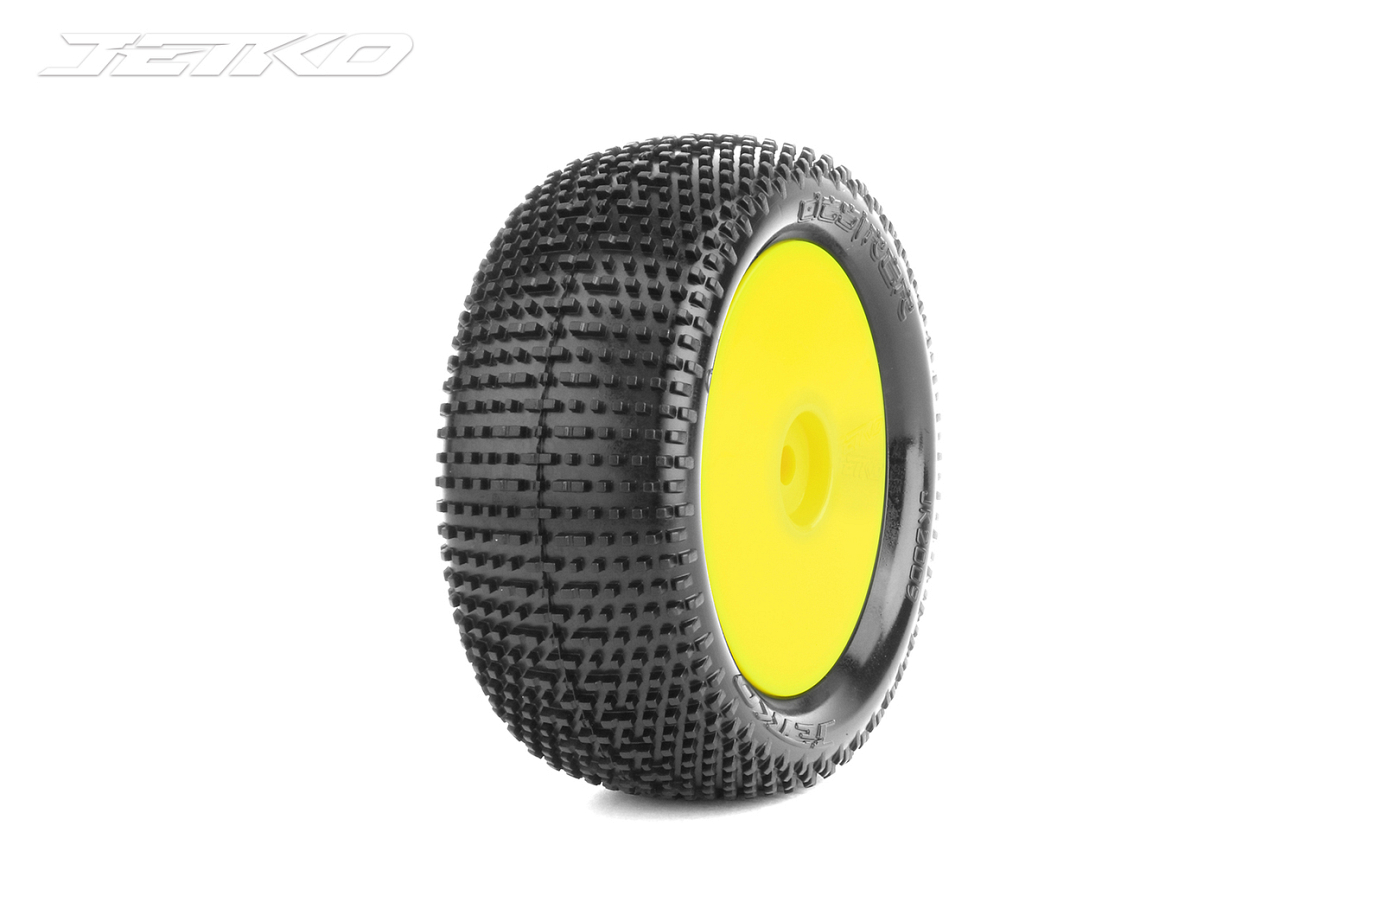 Jetko 1/10 Buggy 4WD Front-DESIRER/Dish/Yellow Rim/Super Soft [2009DYSSG]